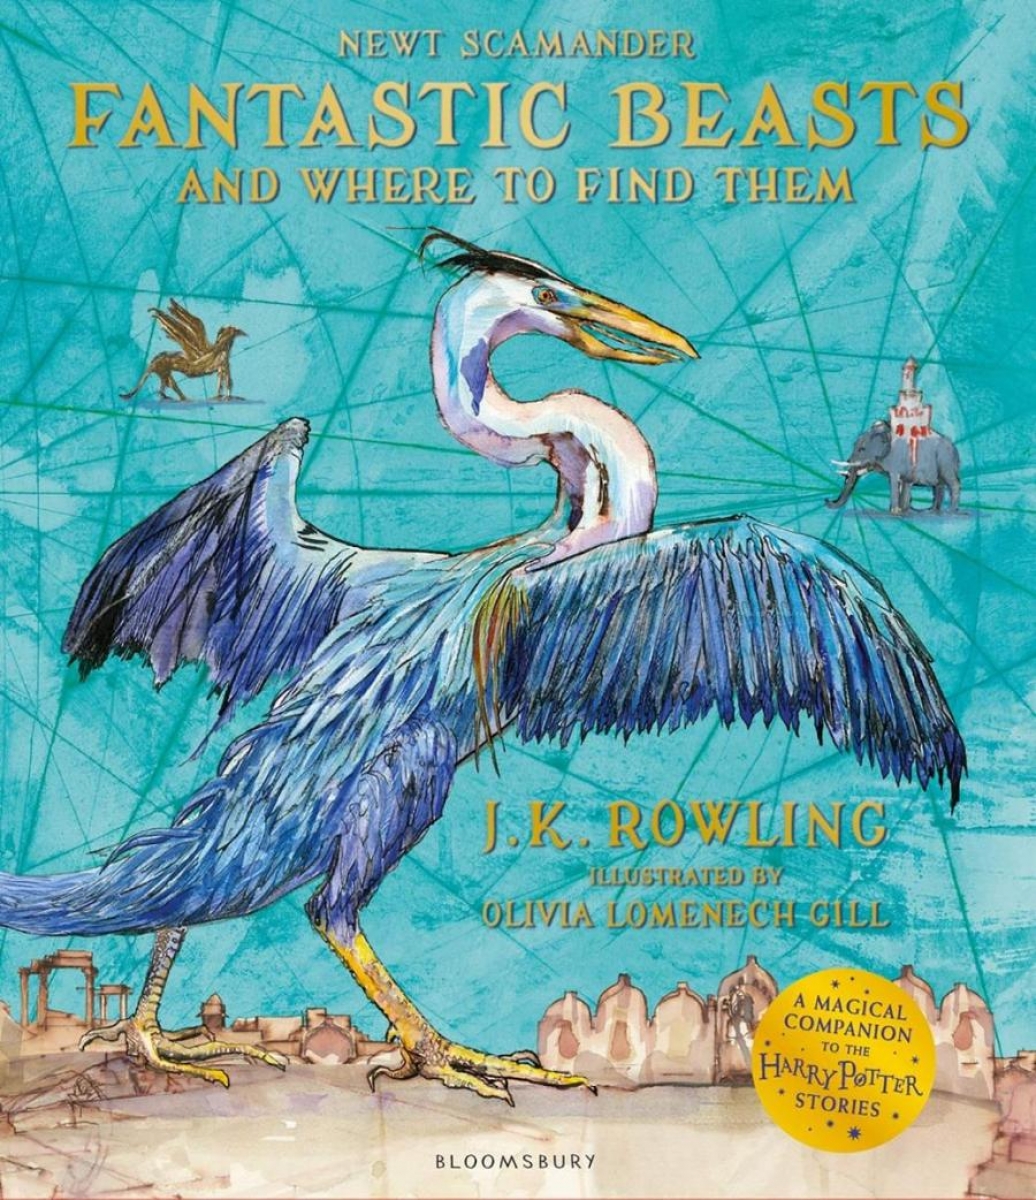 Rowling J.K. Fantastic beasts and where to find them 